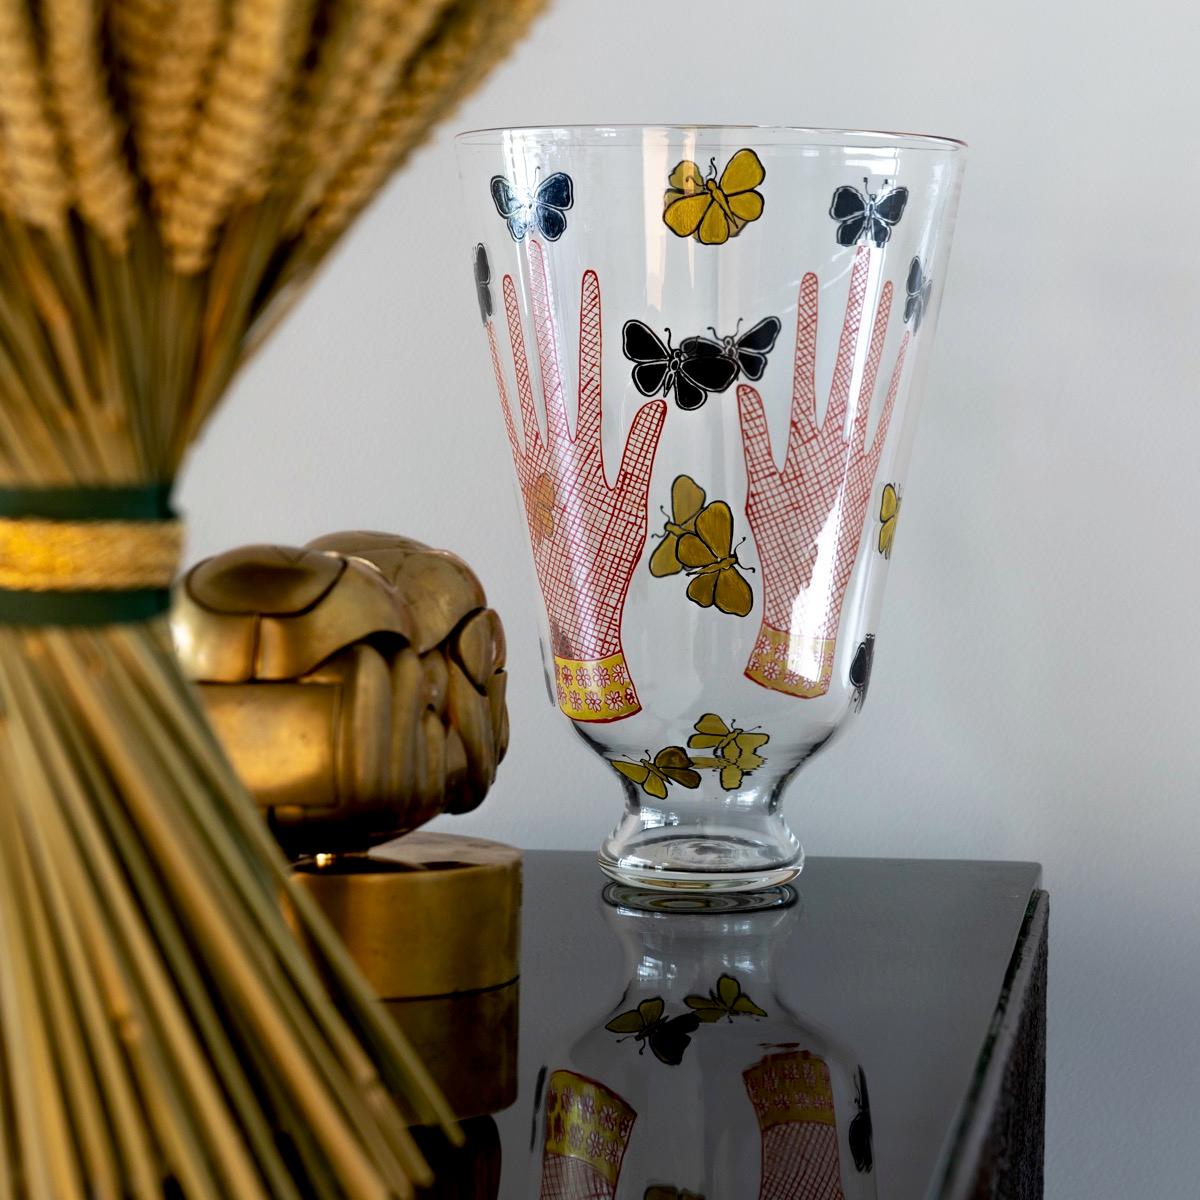 Vase with Hands and Butterflies by Piero Fornasetti, S.A.L.I.R 2